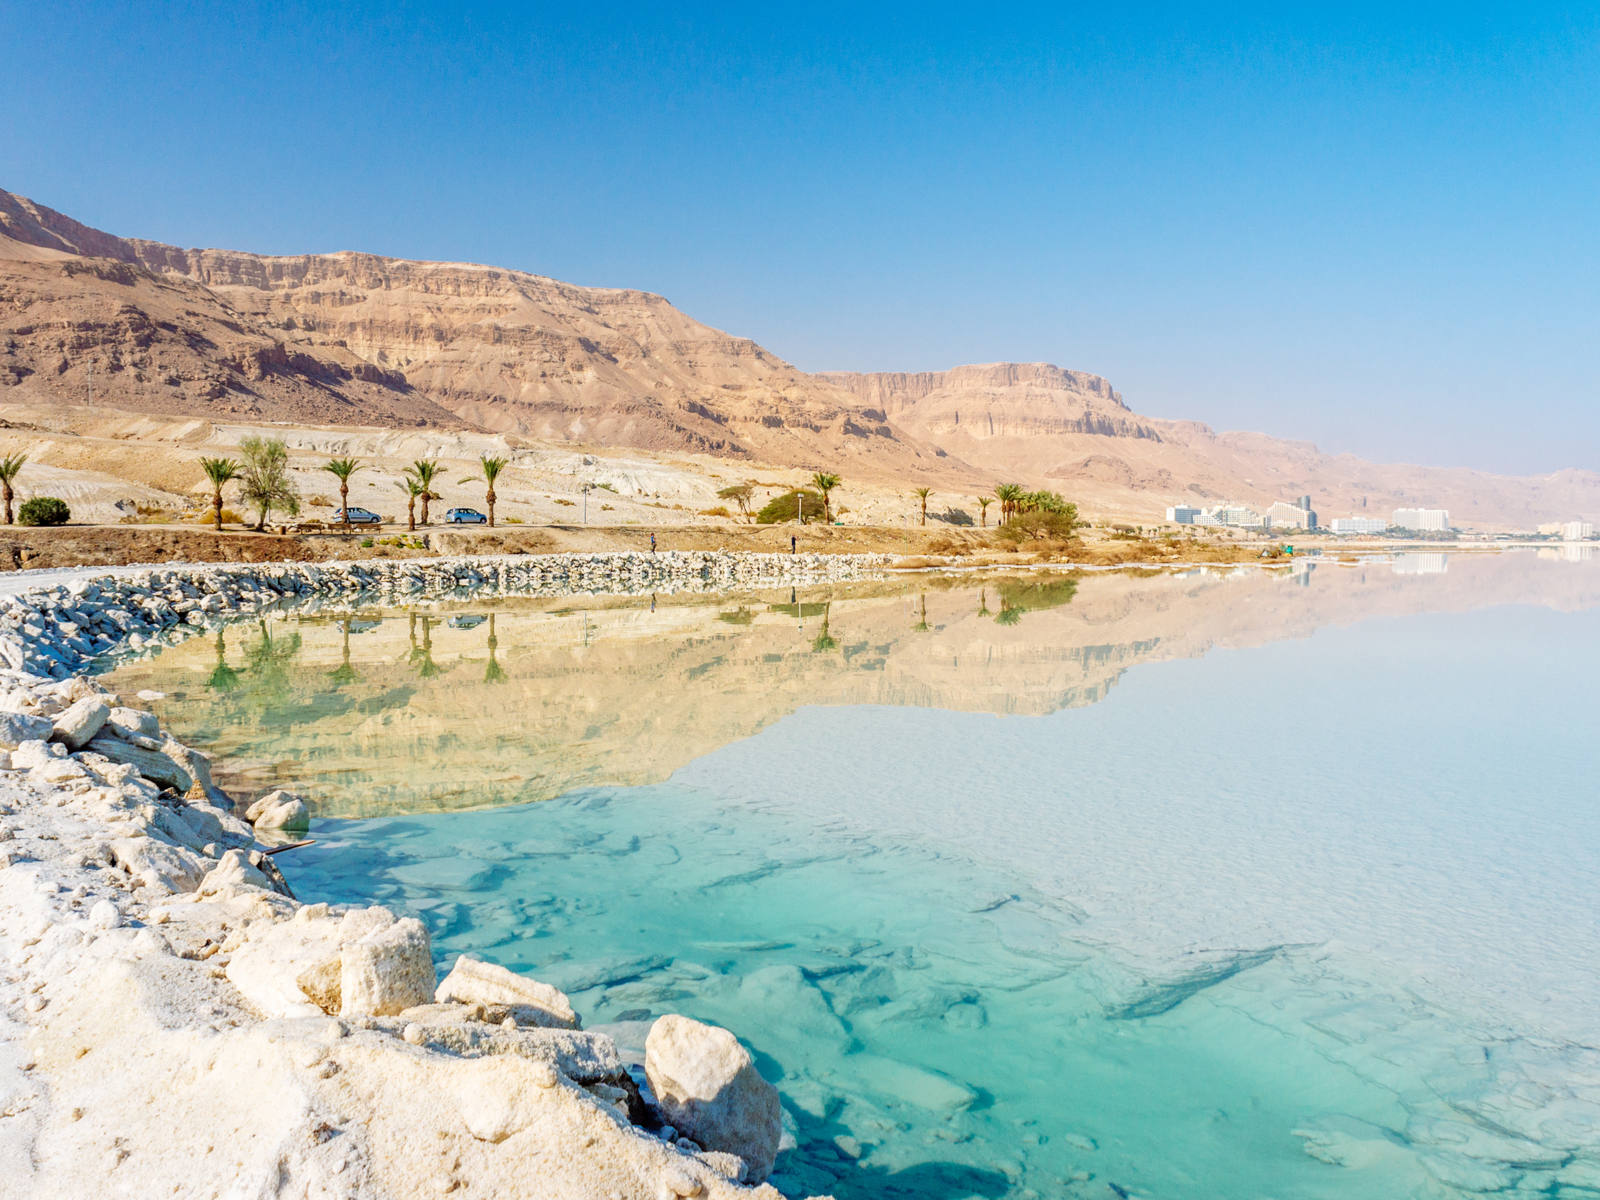 Dead sea coastline with salt deposits pictured during the cheapest time to visit Israel